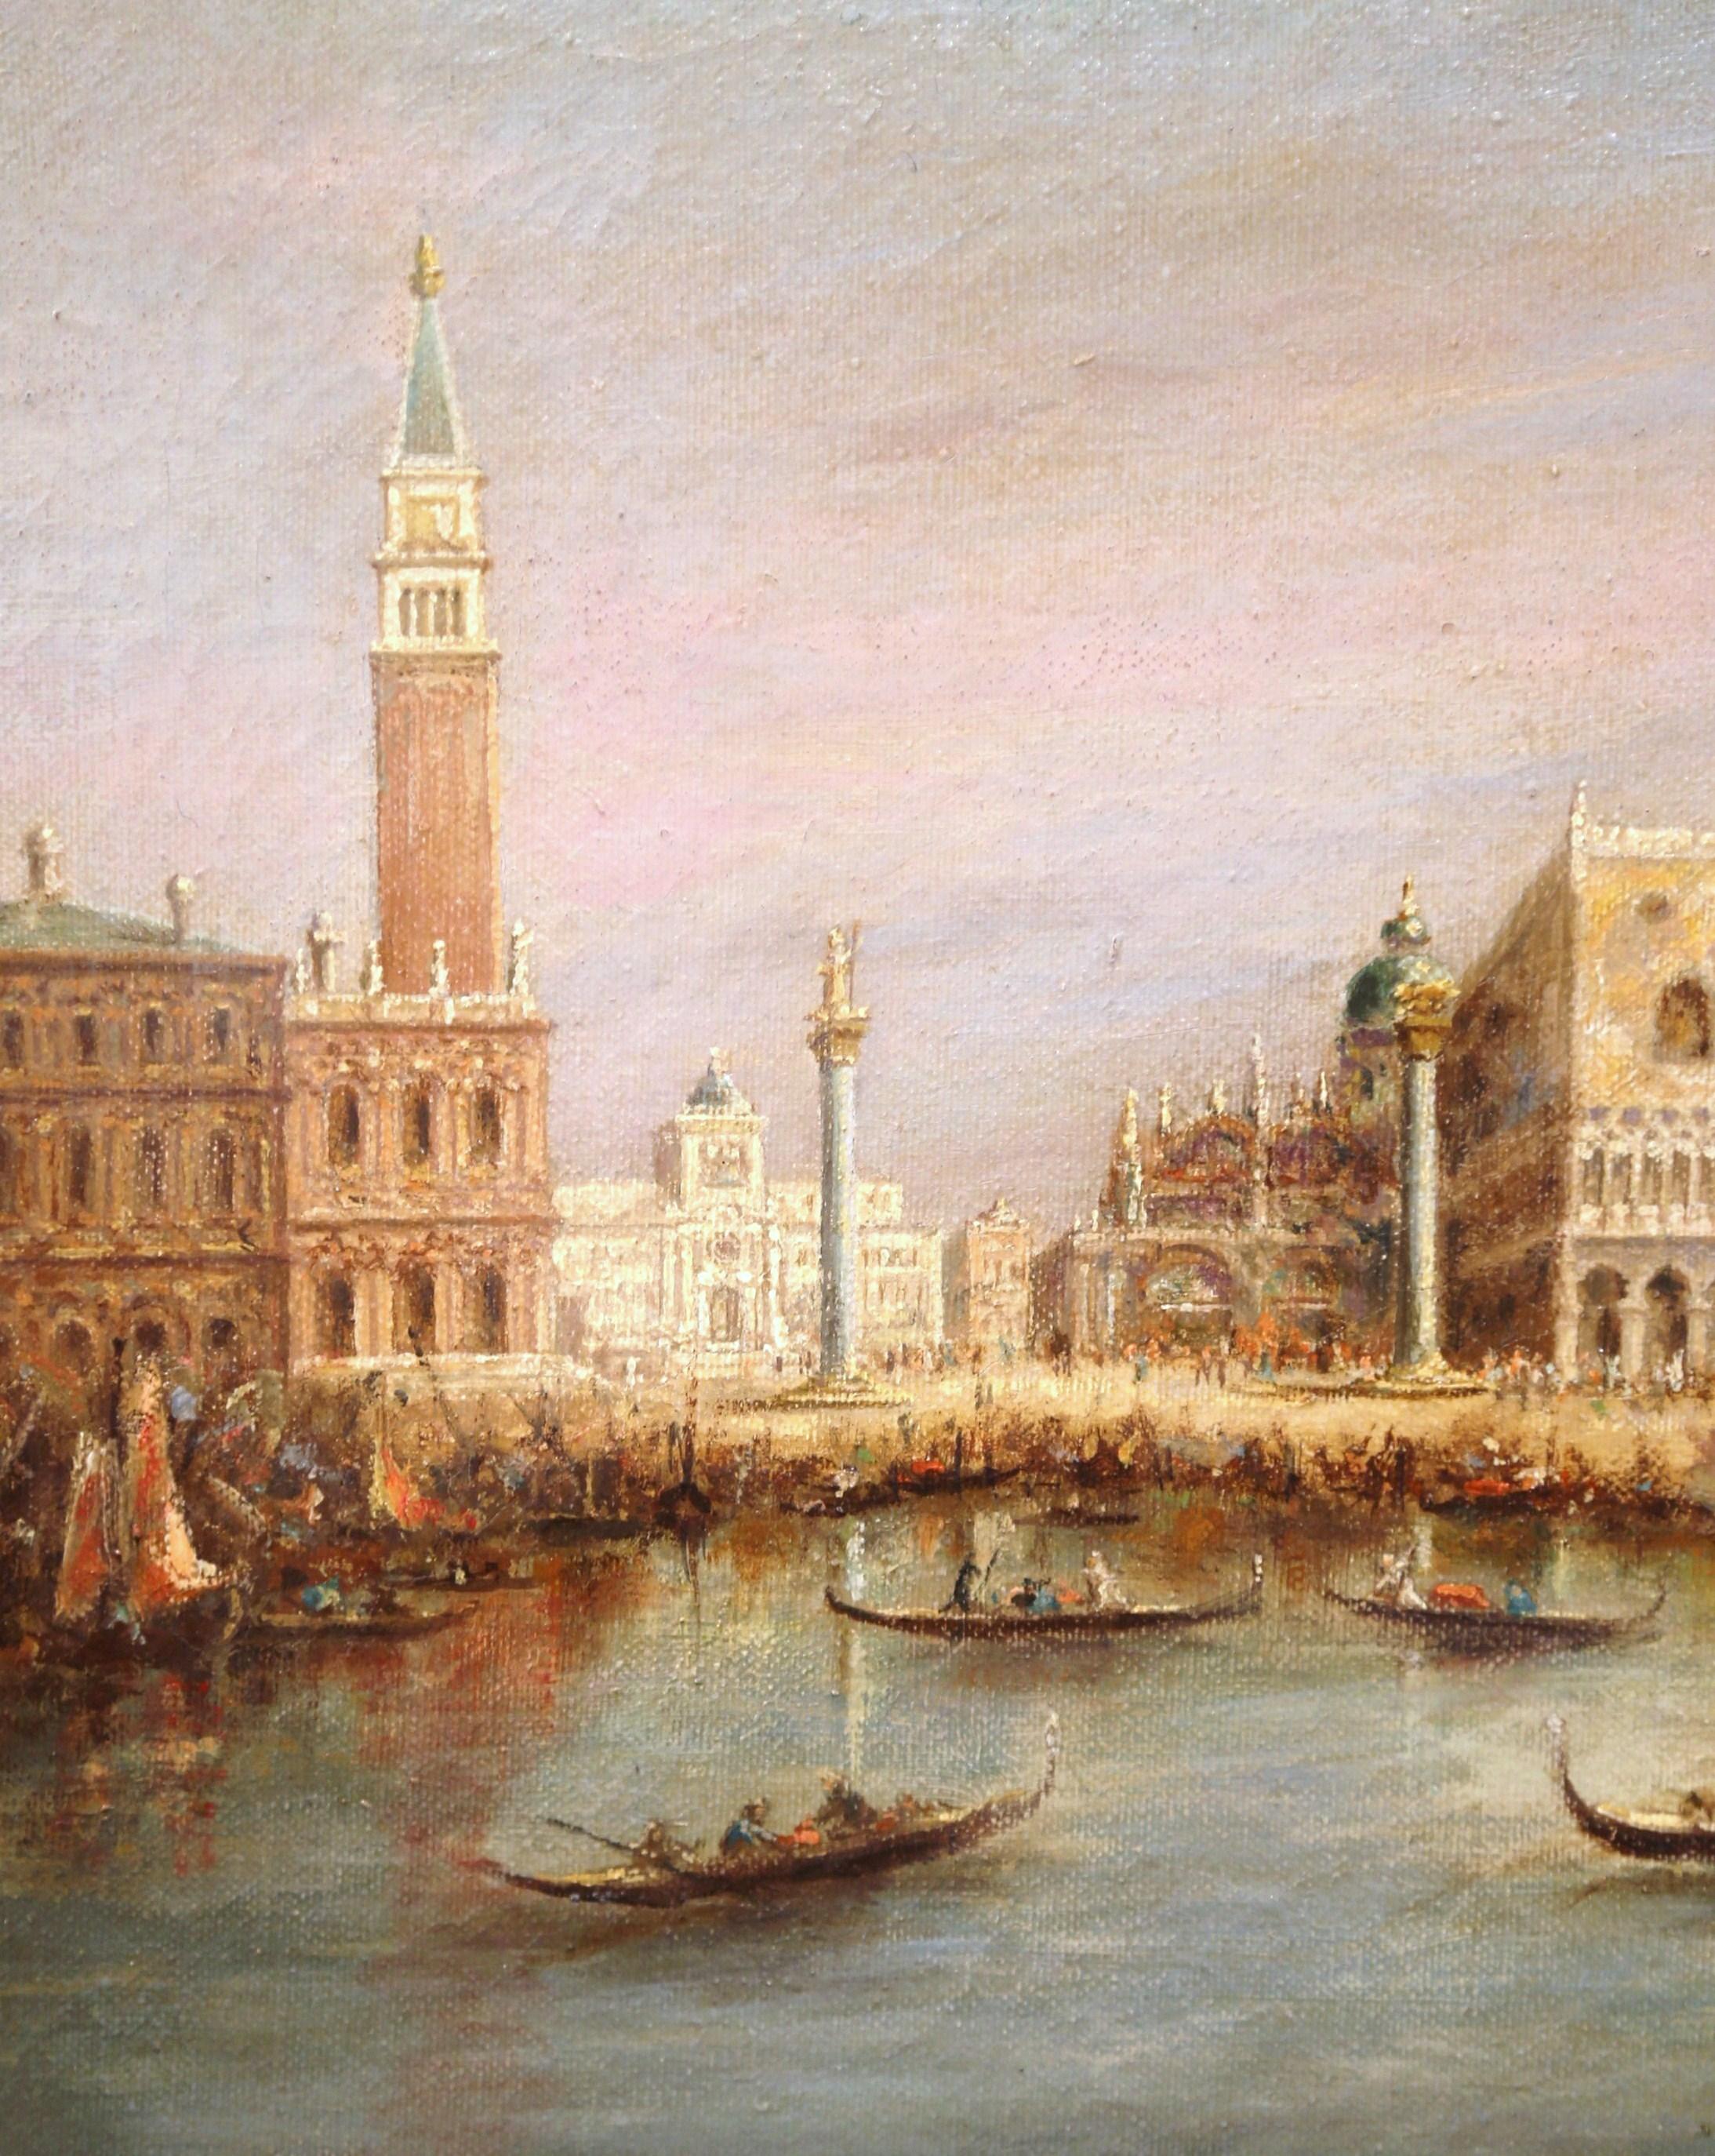 Canvas Mid-20th Century Venice Oil Painting in Gilt Frame Signed A. Lemstra Dated 1959 For Sale